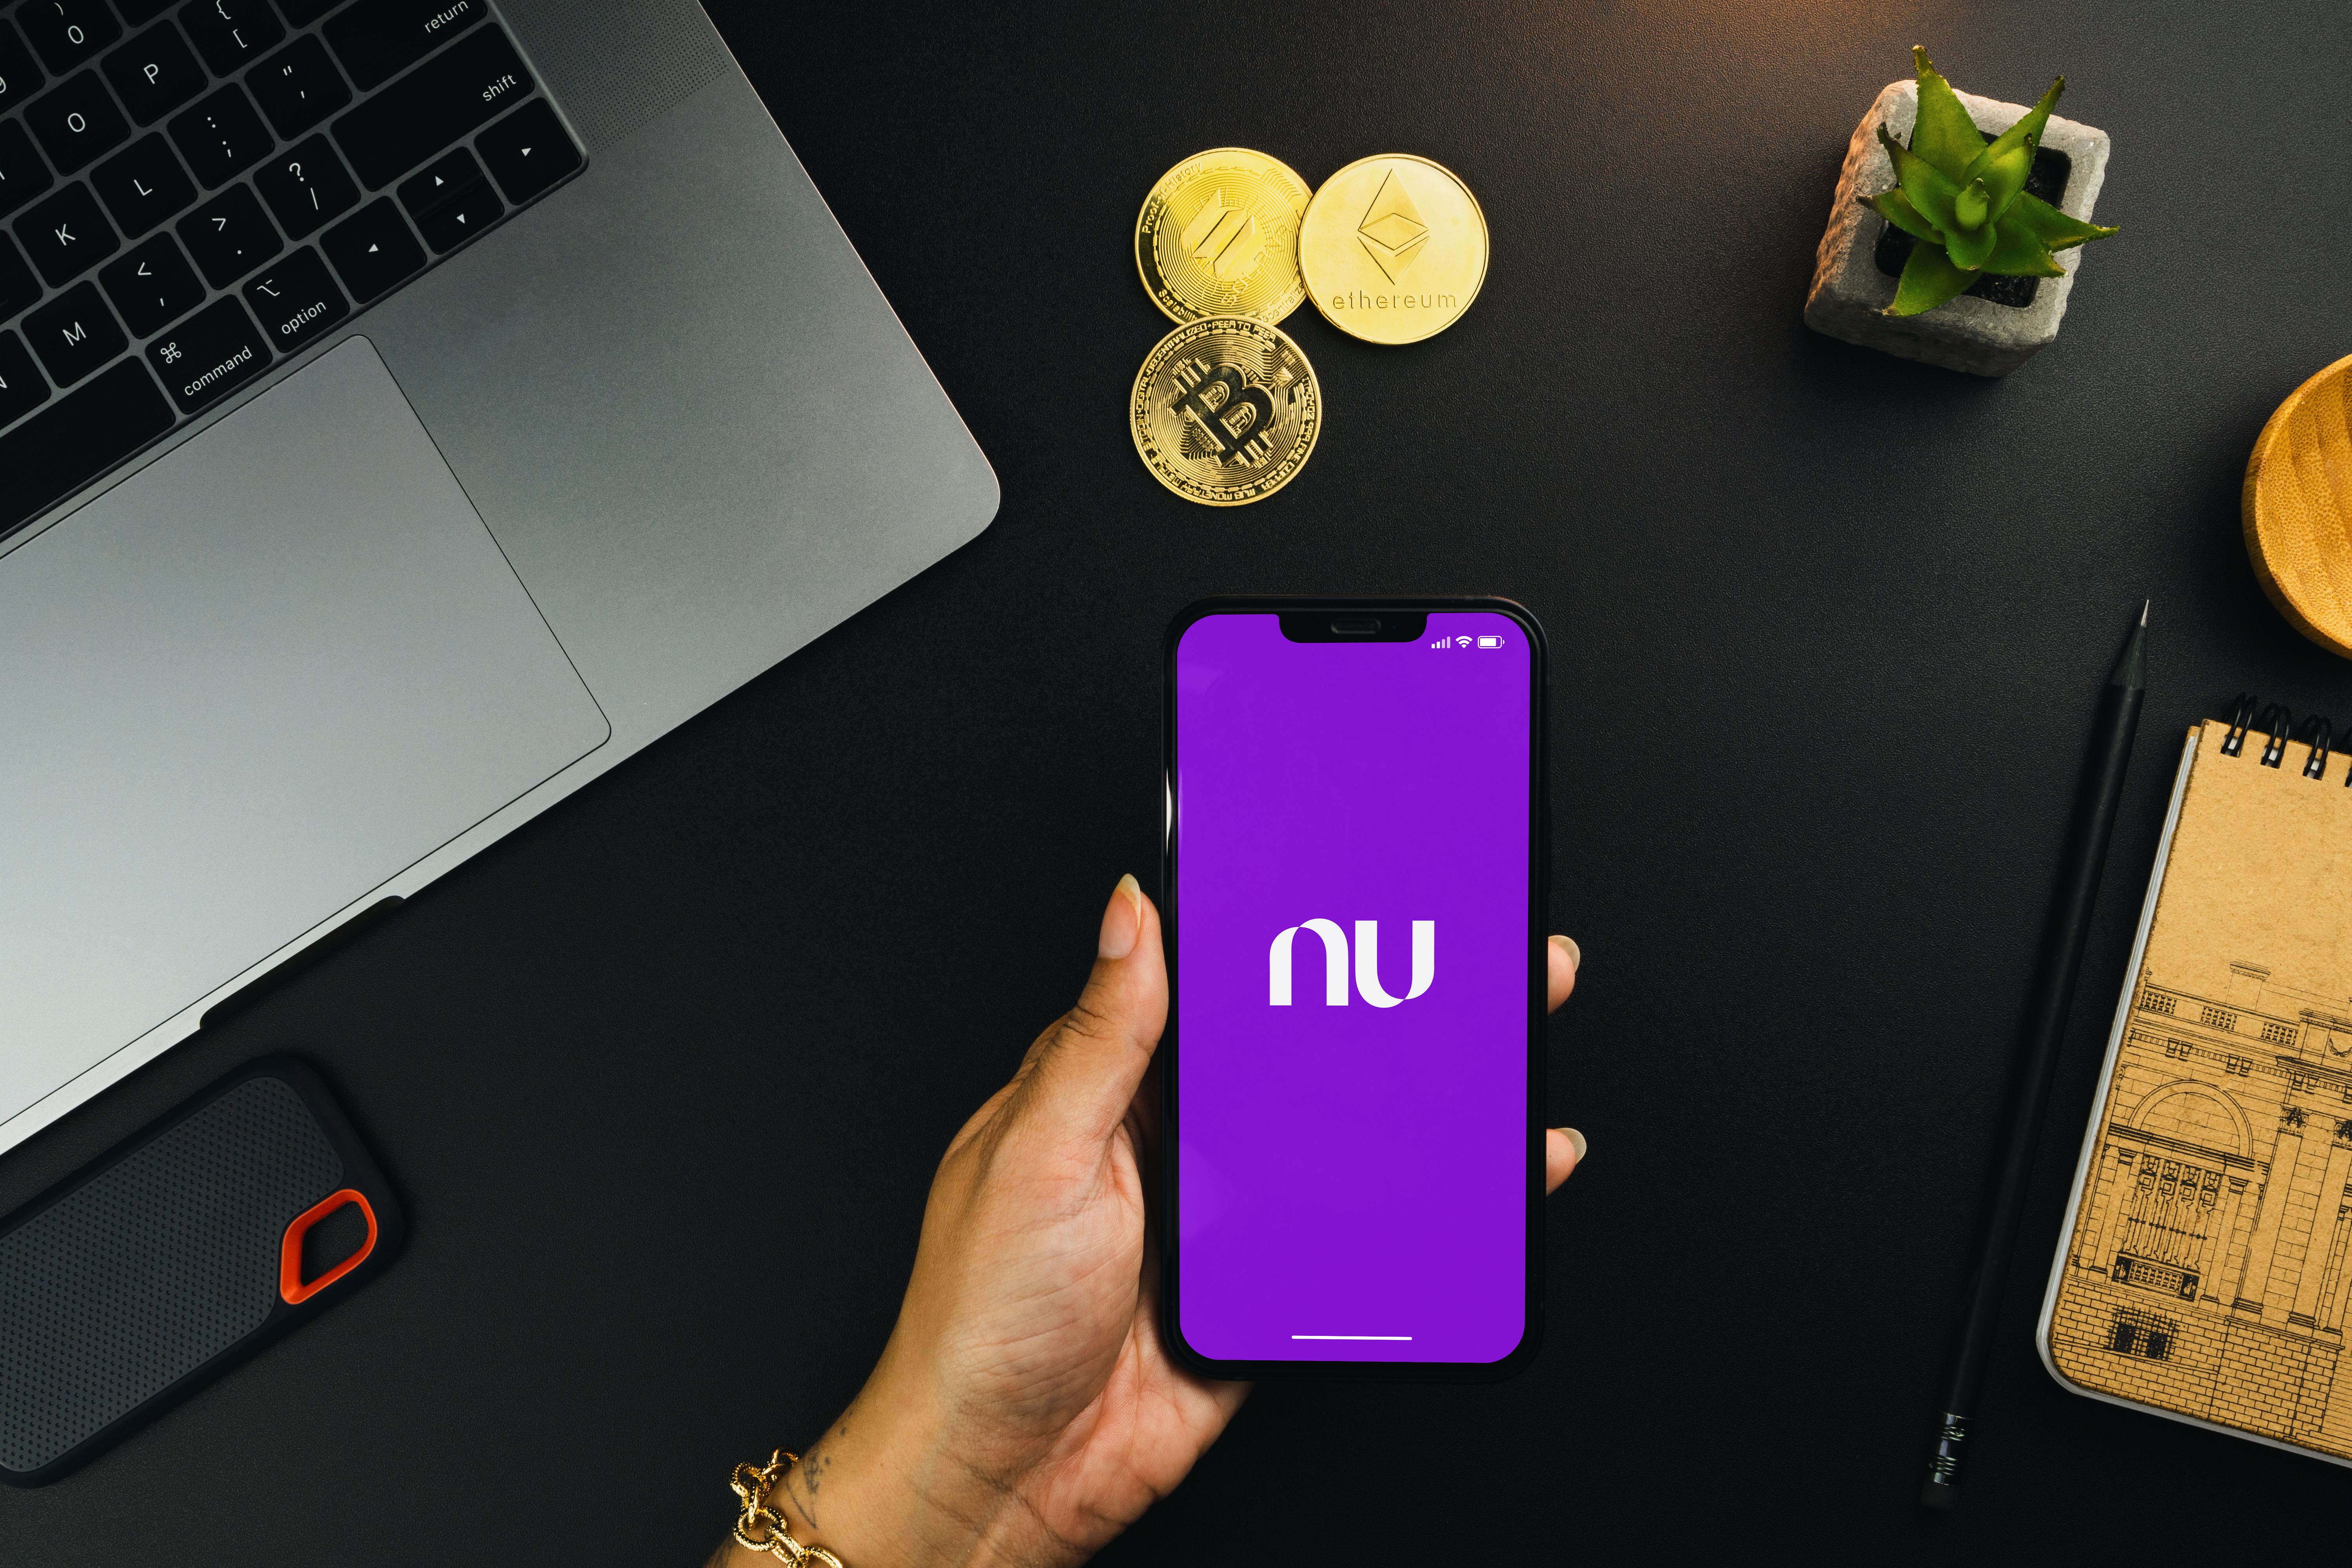 A person is holding a smartphone with the Nubank Bank app running on the screen.  On a table behind the phone, artistic representations of crypto-assets are visible, along with a laptop.